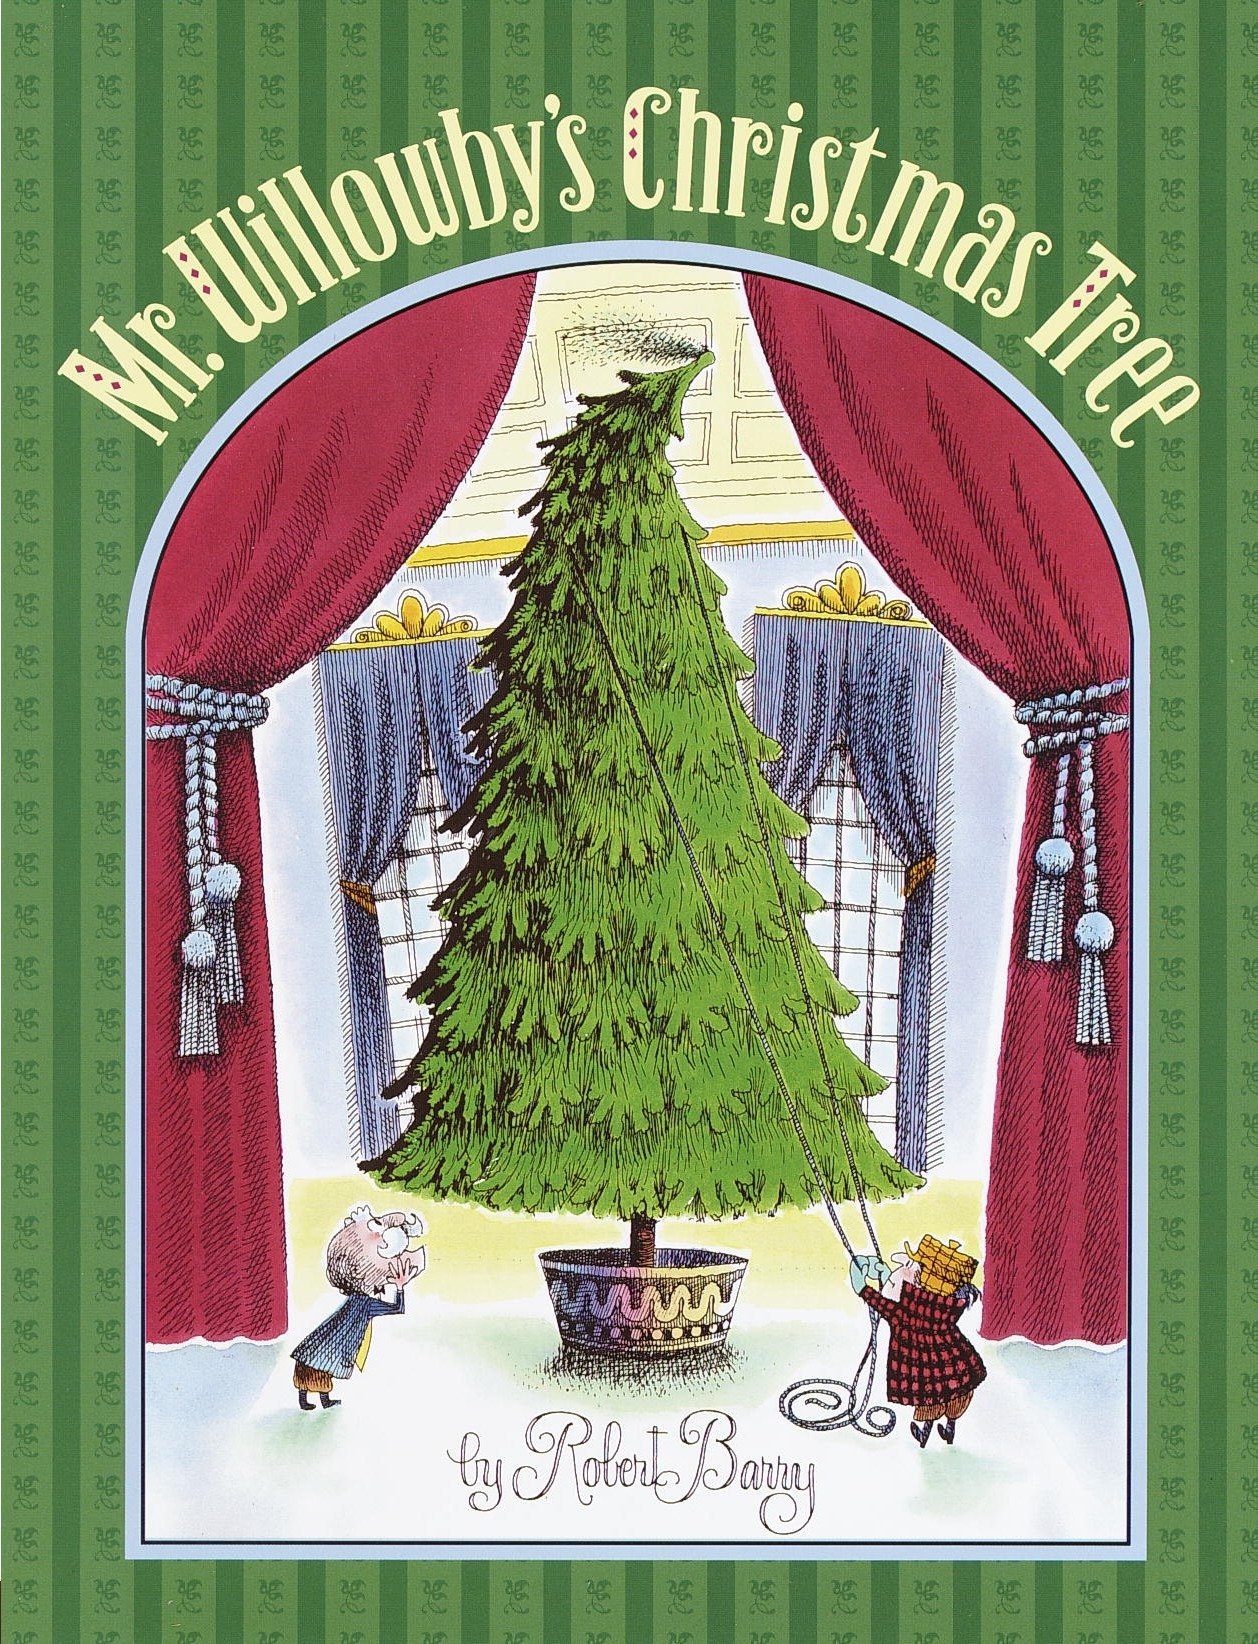 Mr. Willowby’s Christmas Tree by Robert E. Barry